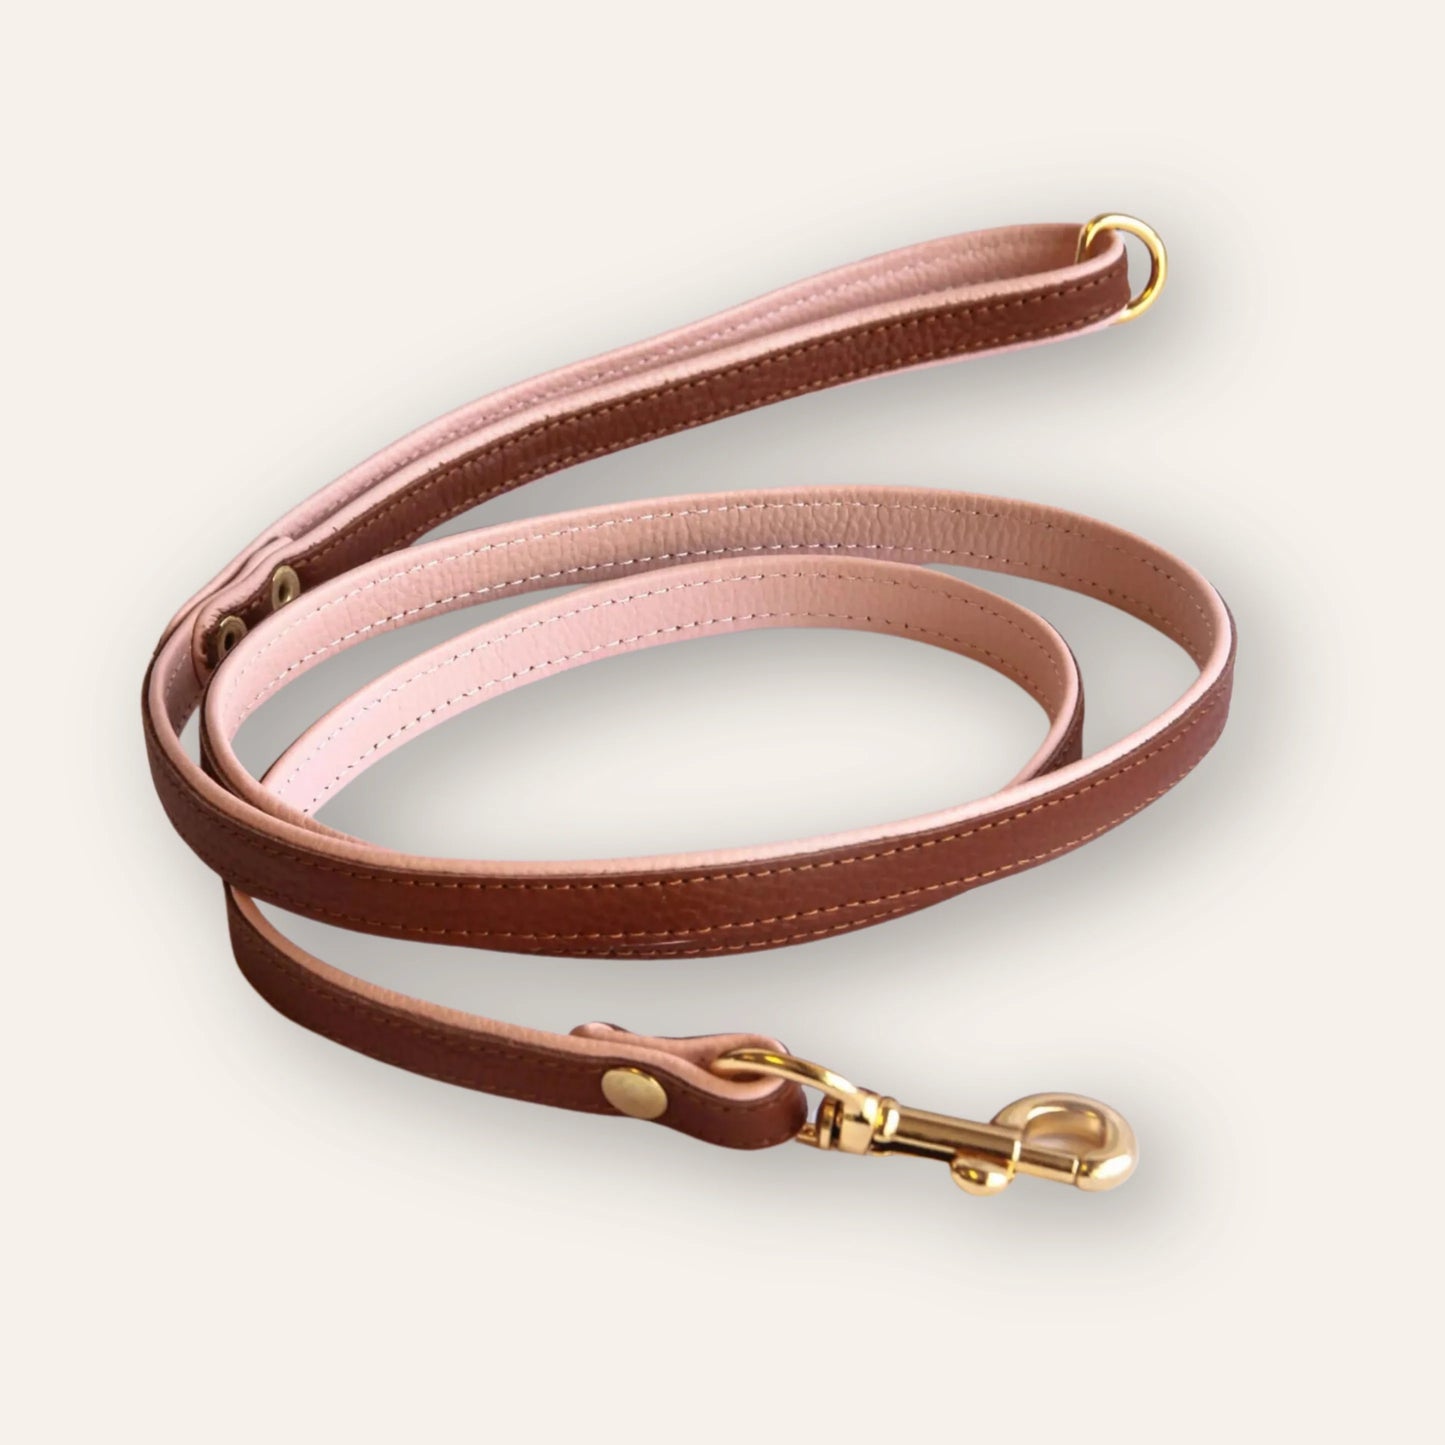 Leather Lead - Brown / Light Pink